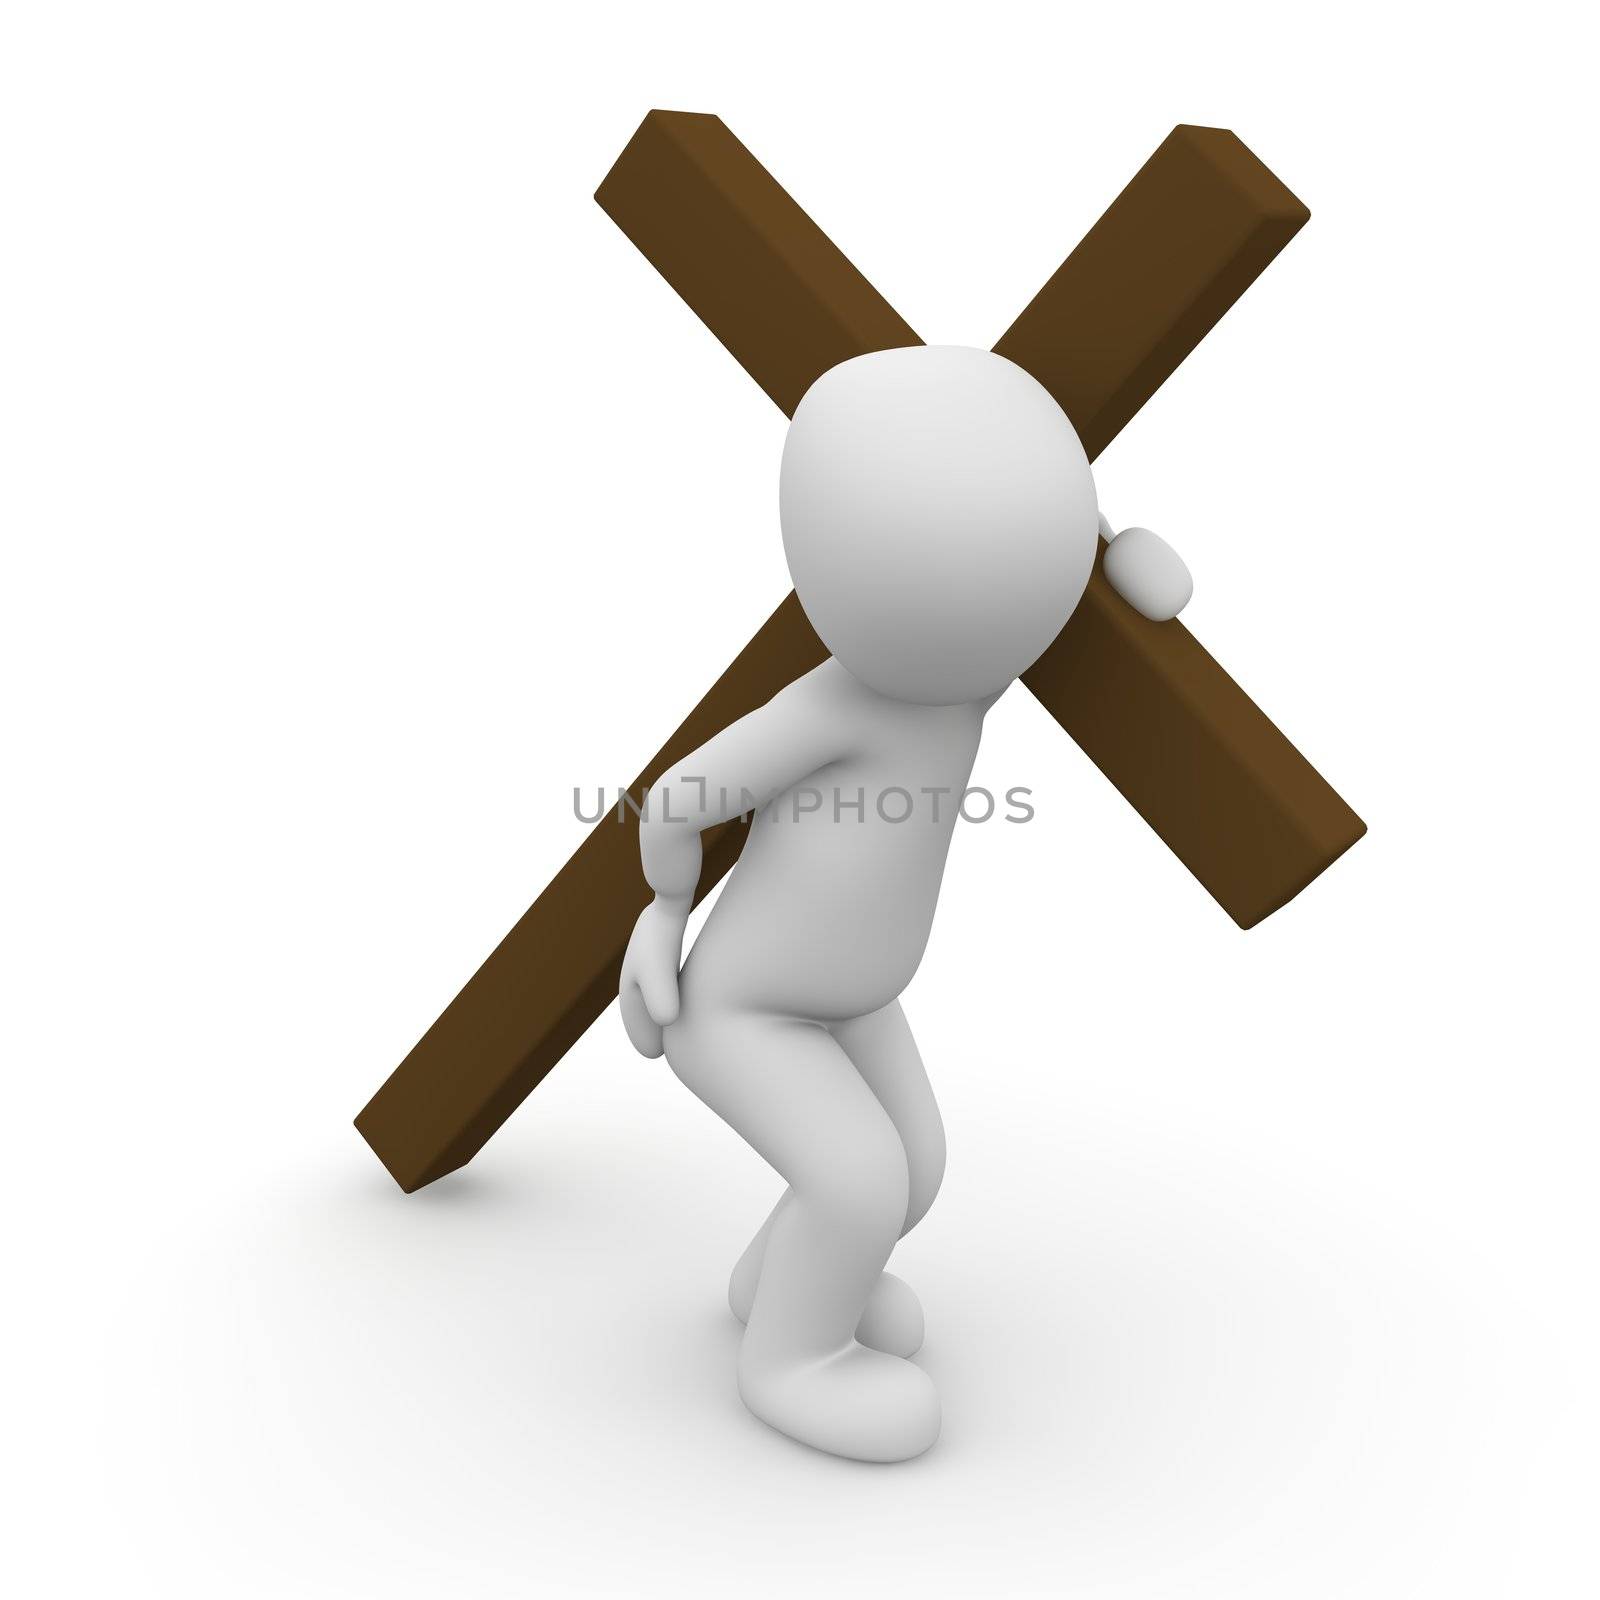 Jesus Christ carrying his cross on the way to crucifixion